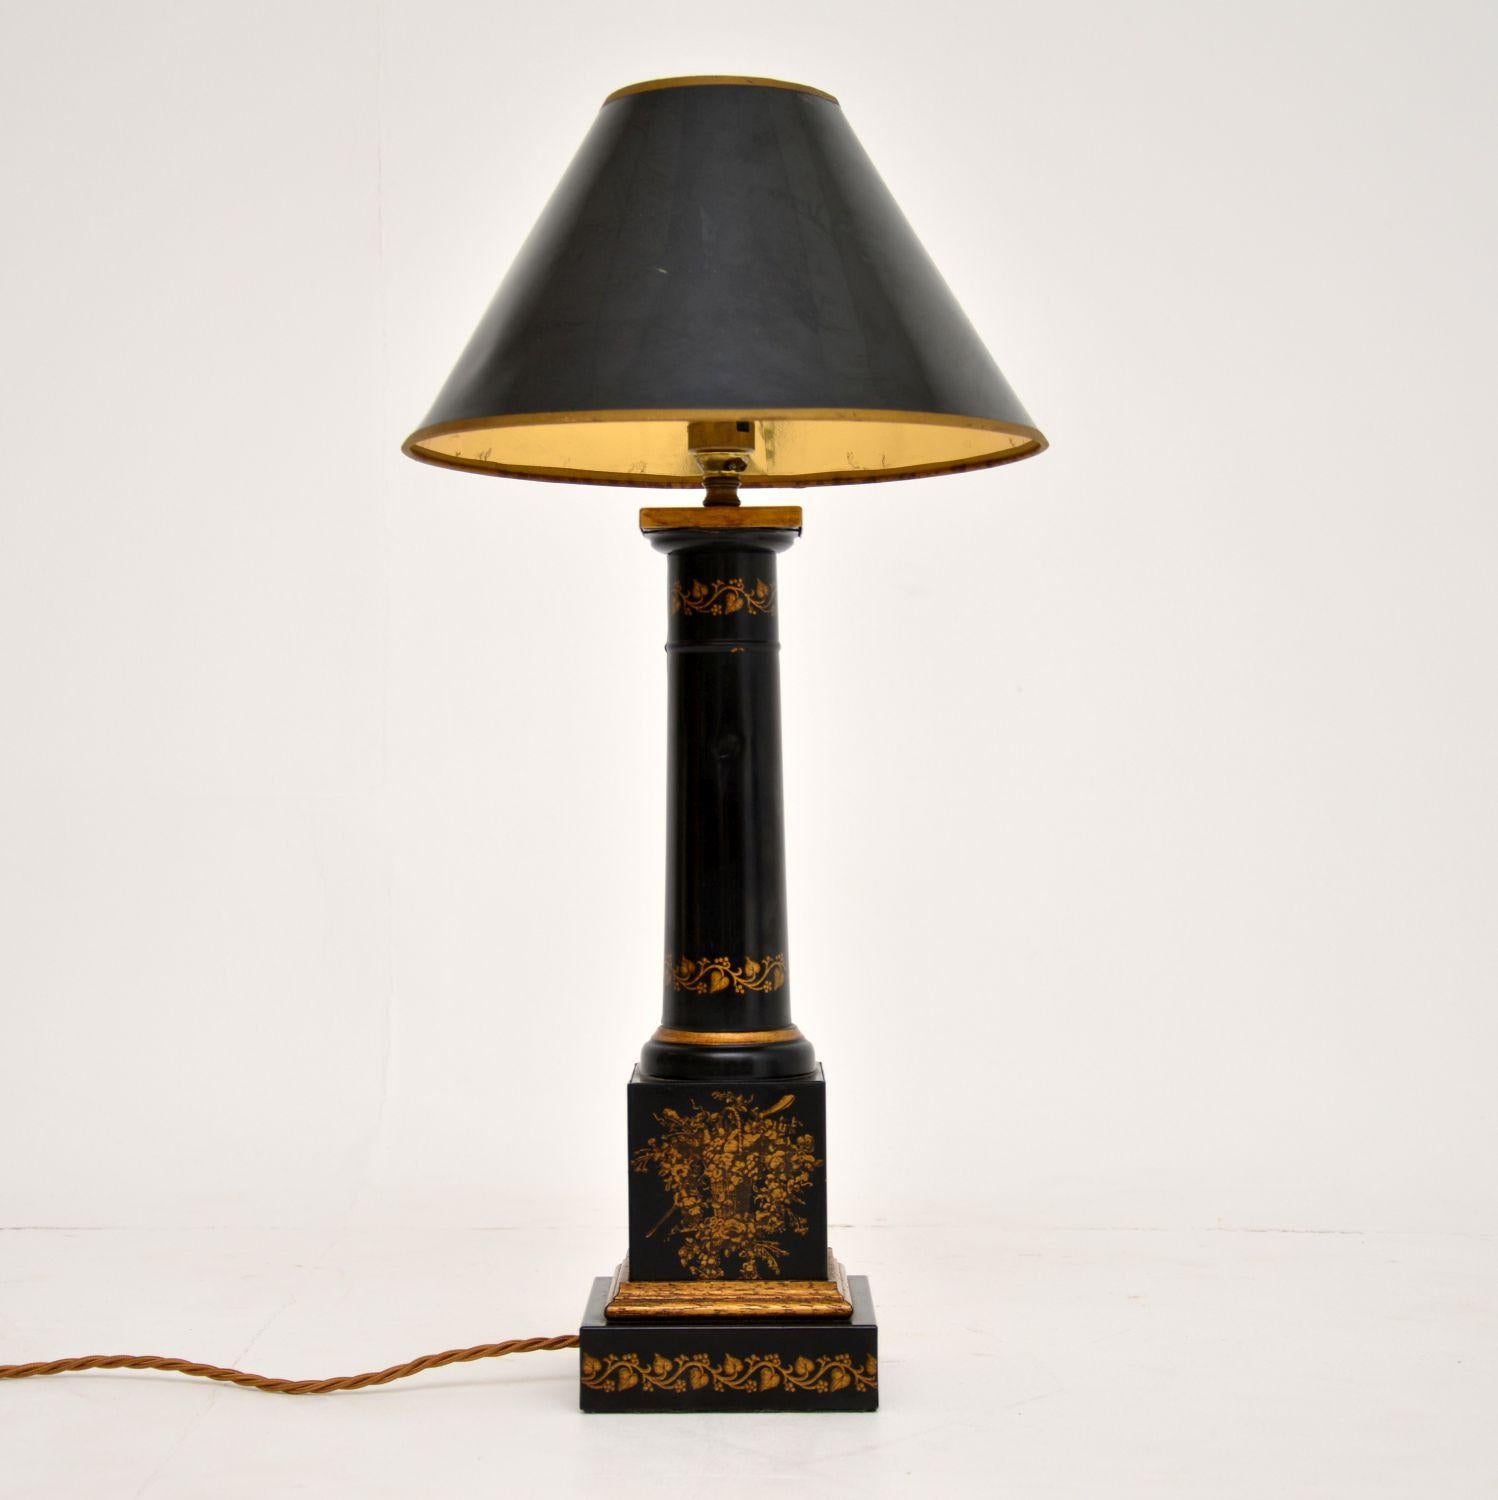 Antique French Empire neoclassical style Tole metal table lamp in excellent original condition with floral decoration.

This lamp has a very bold form. The shade which was on this when we acquired it, is perfect for the base and is in okay